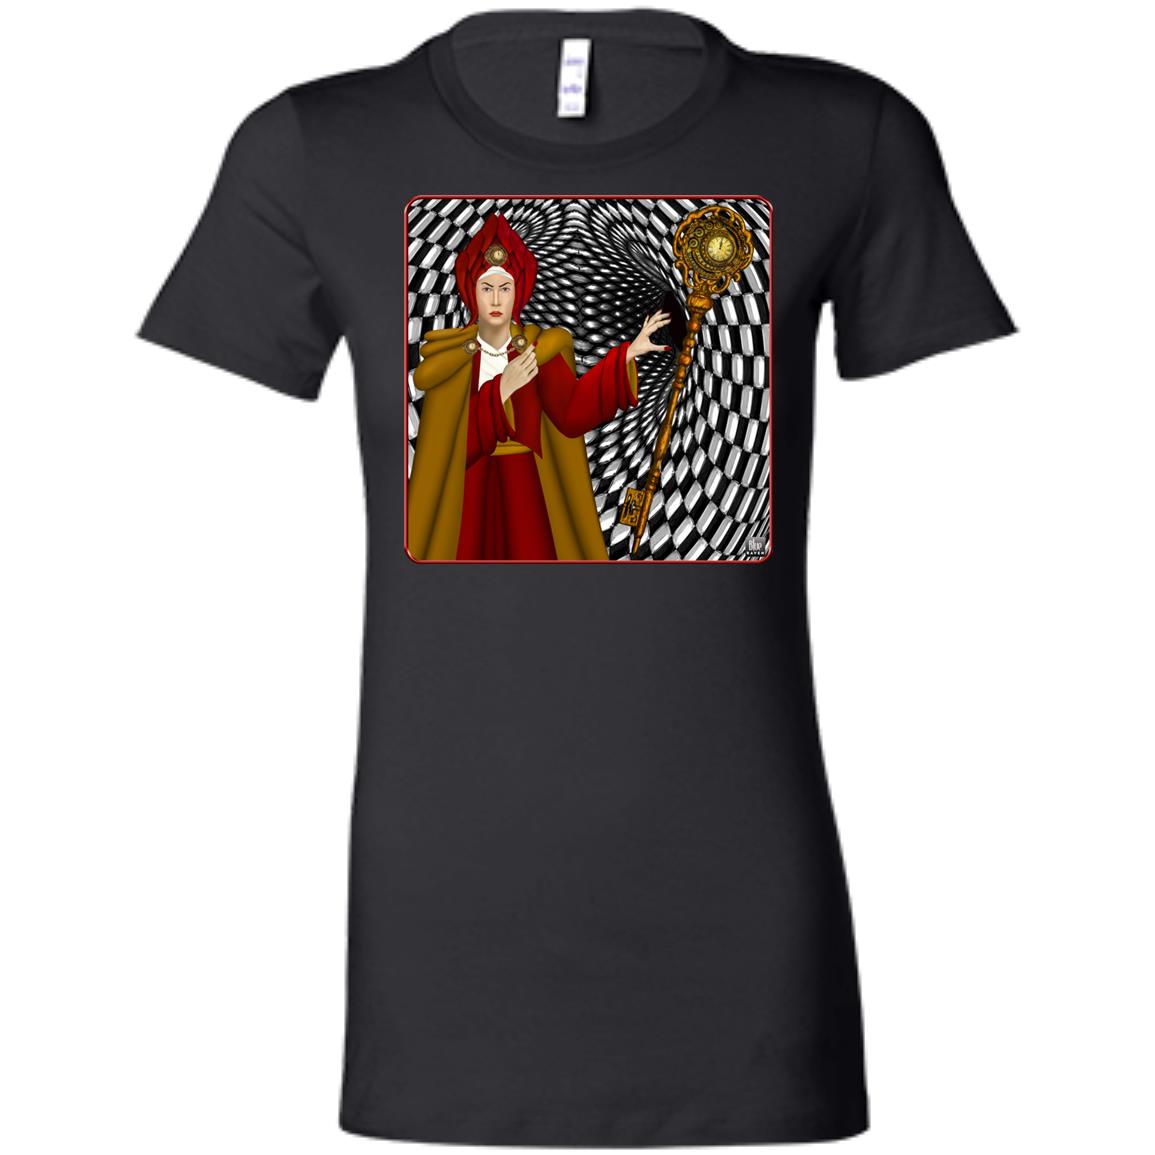 PORTRAIT OF THE RED QUEEN - Women's Fitted T-Shirt